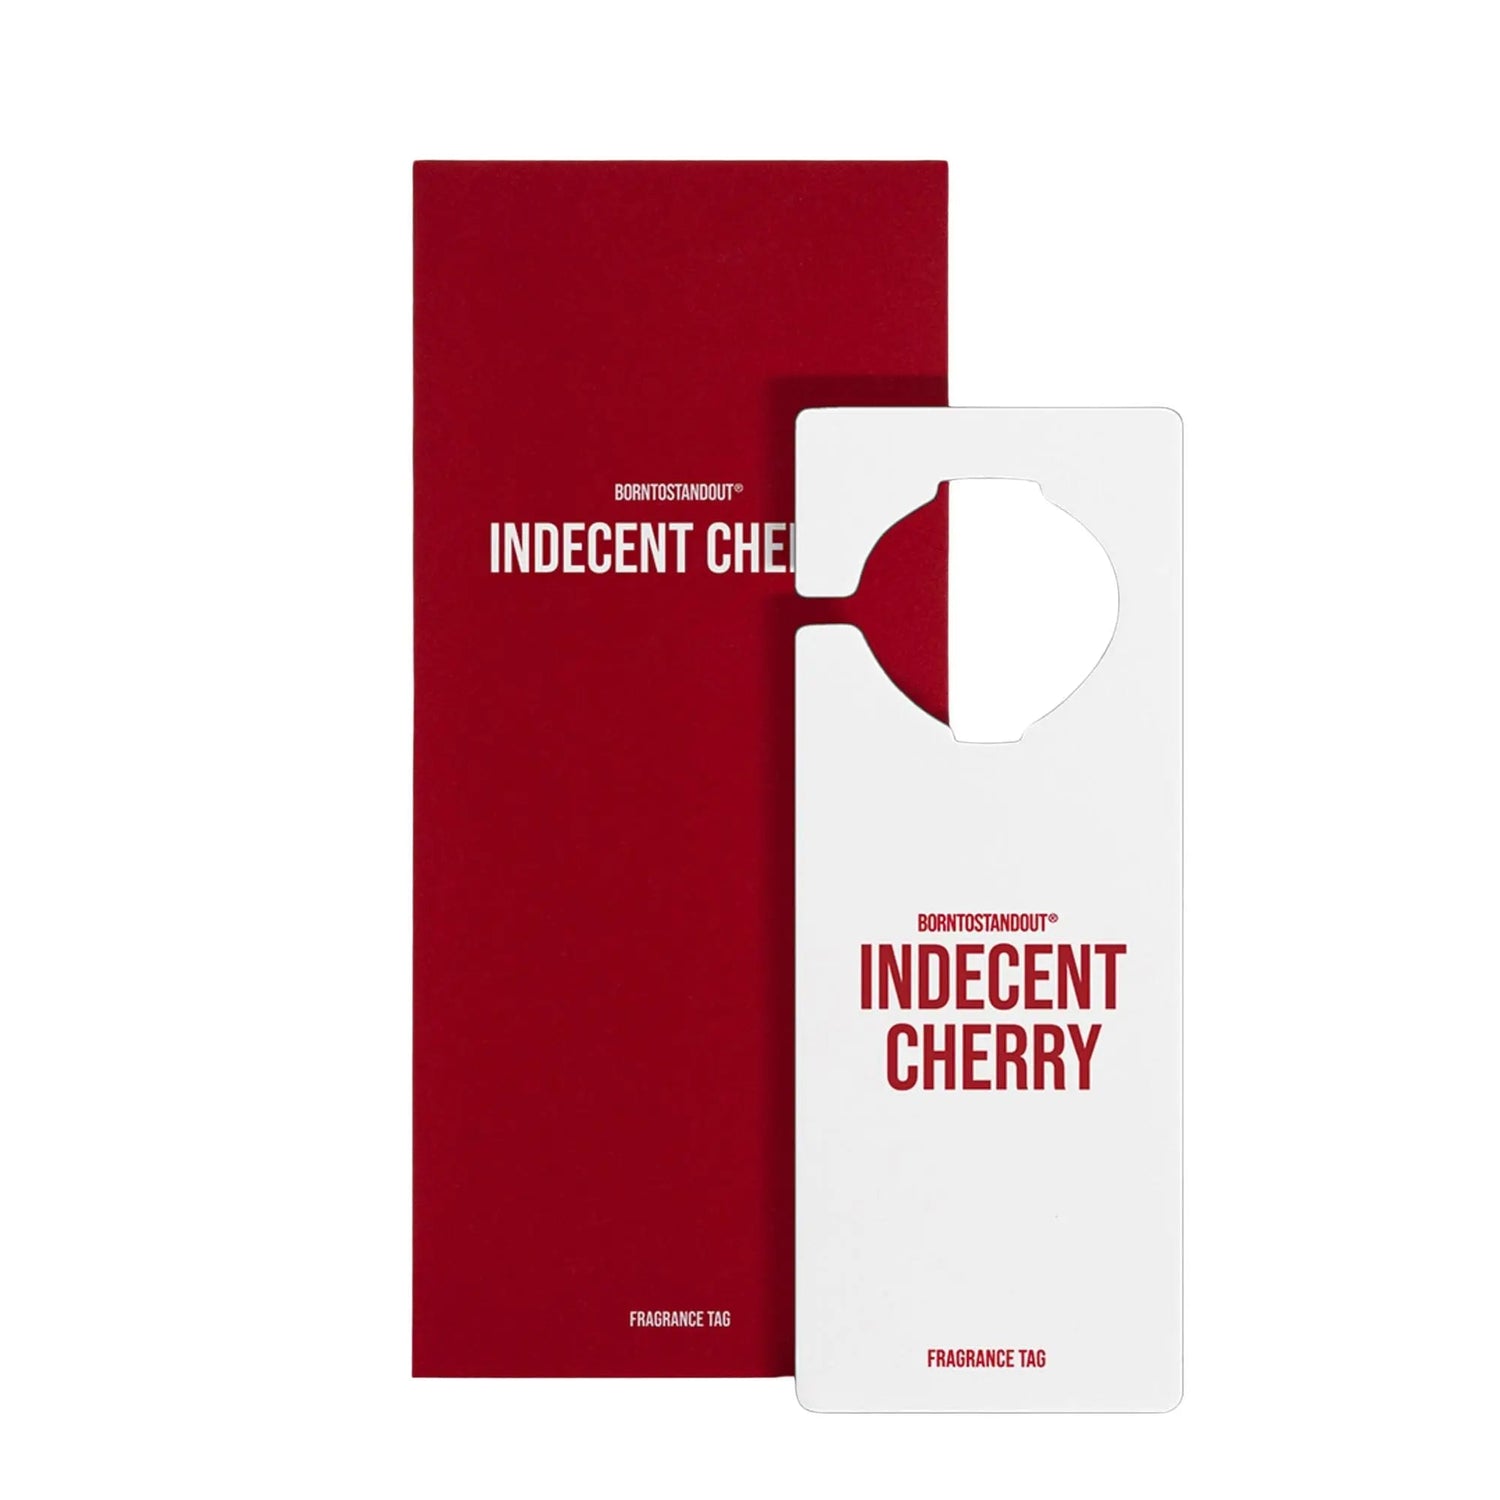 Born to stand out Indecent Cherry Fragrance Tag 1 Piece